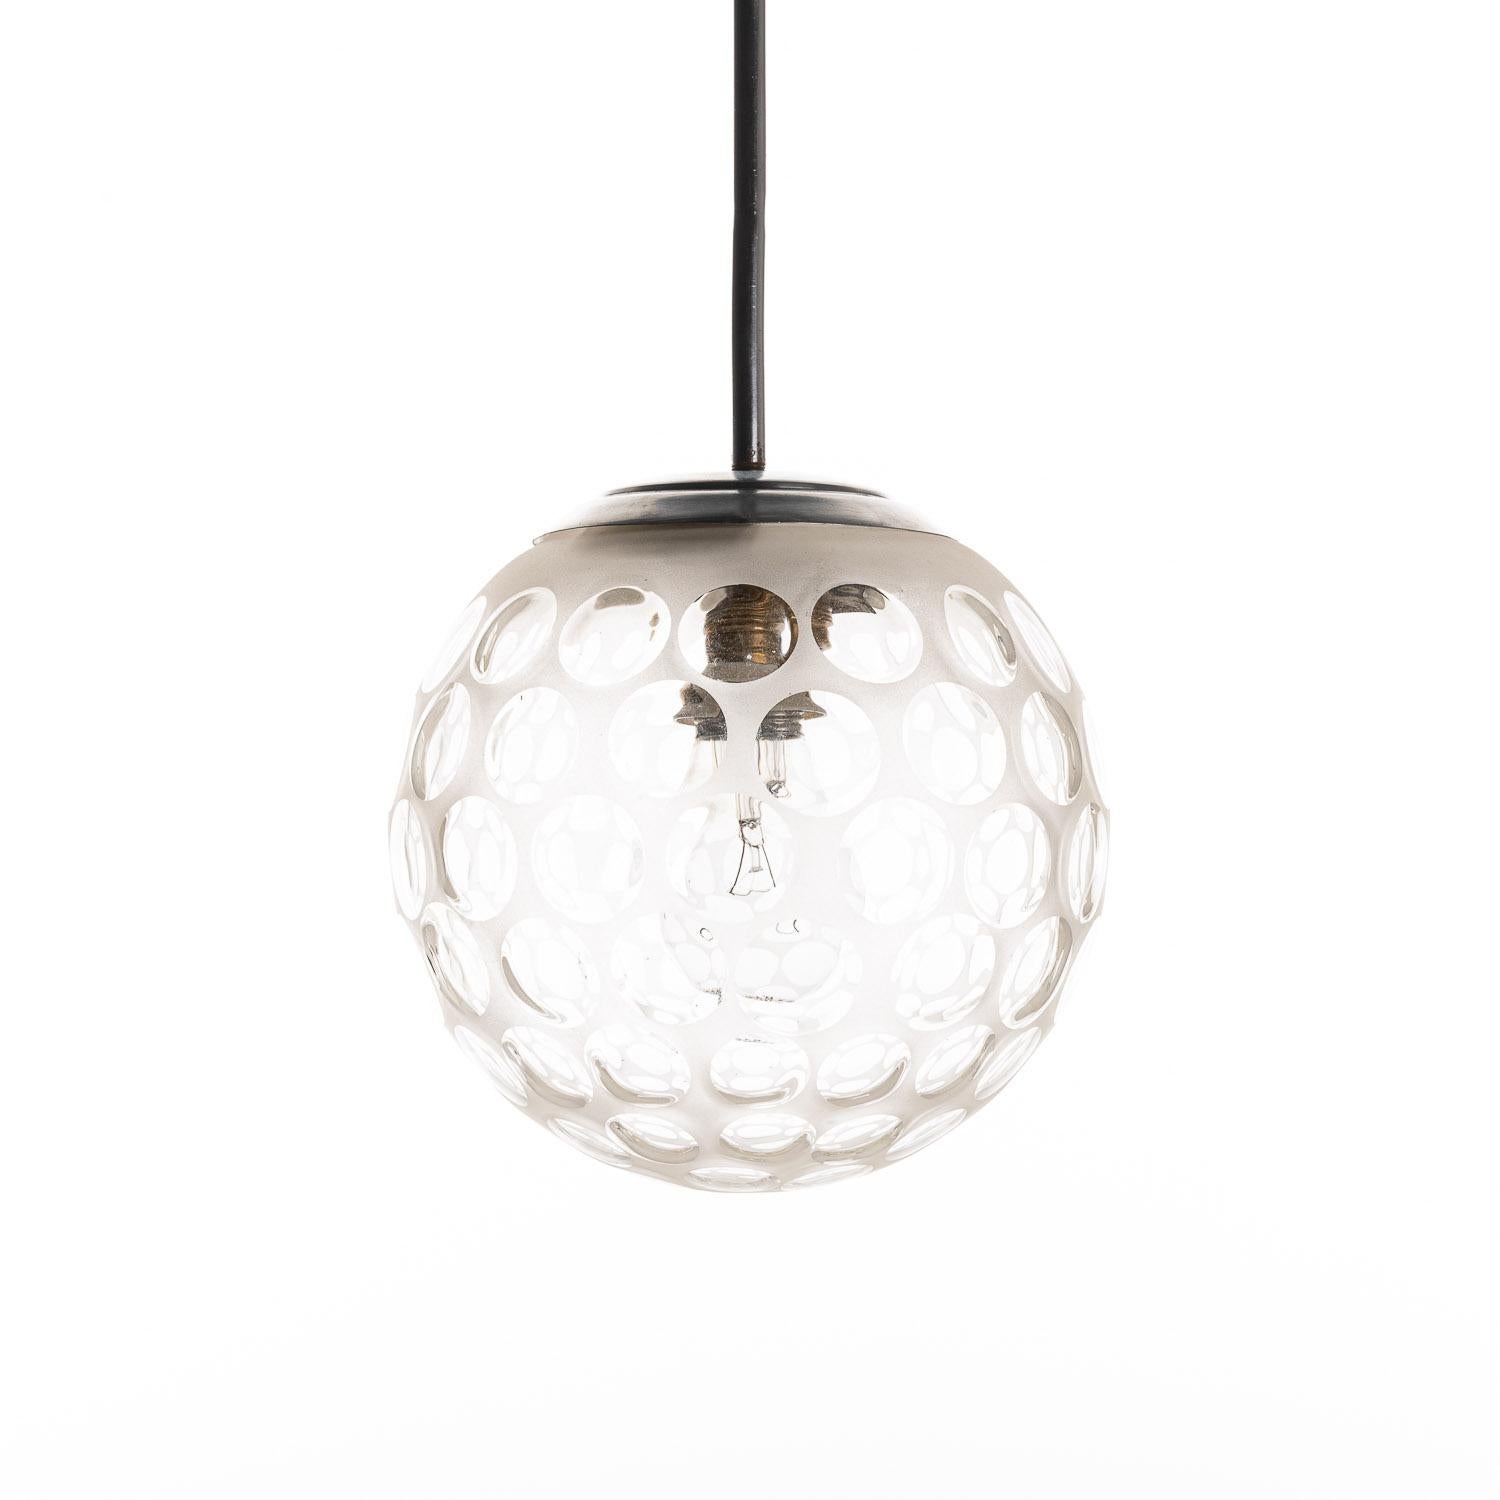 Italian 1940's Murano Glass and Metal Pendant Attributed to Lenti by Carlo scarpa For Sale